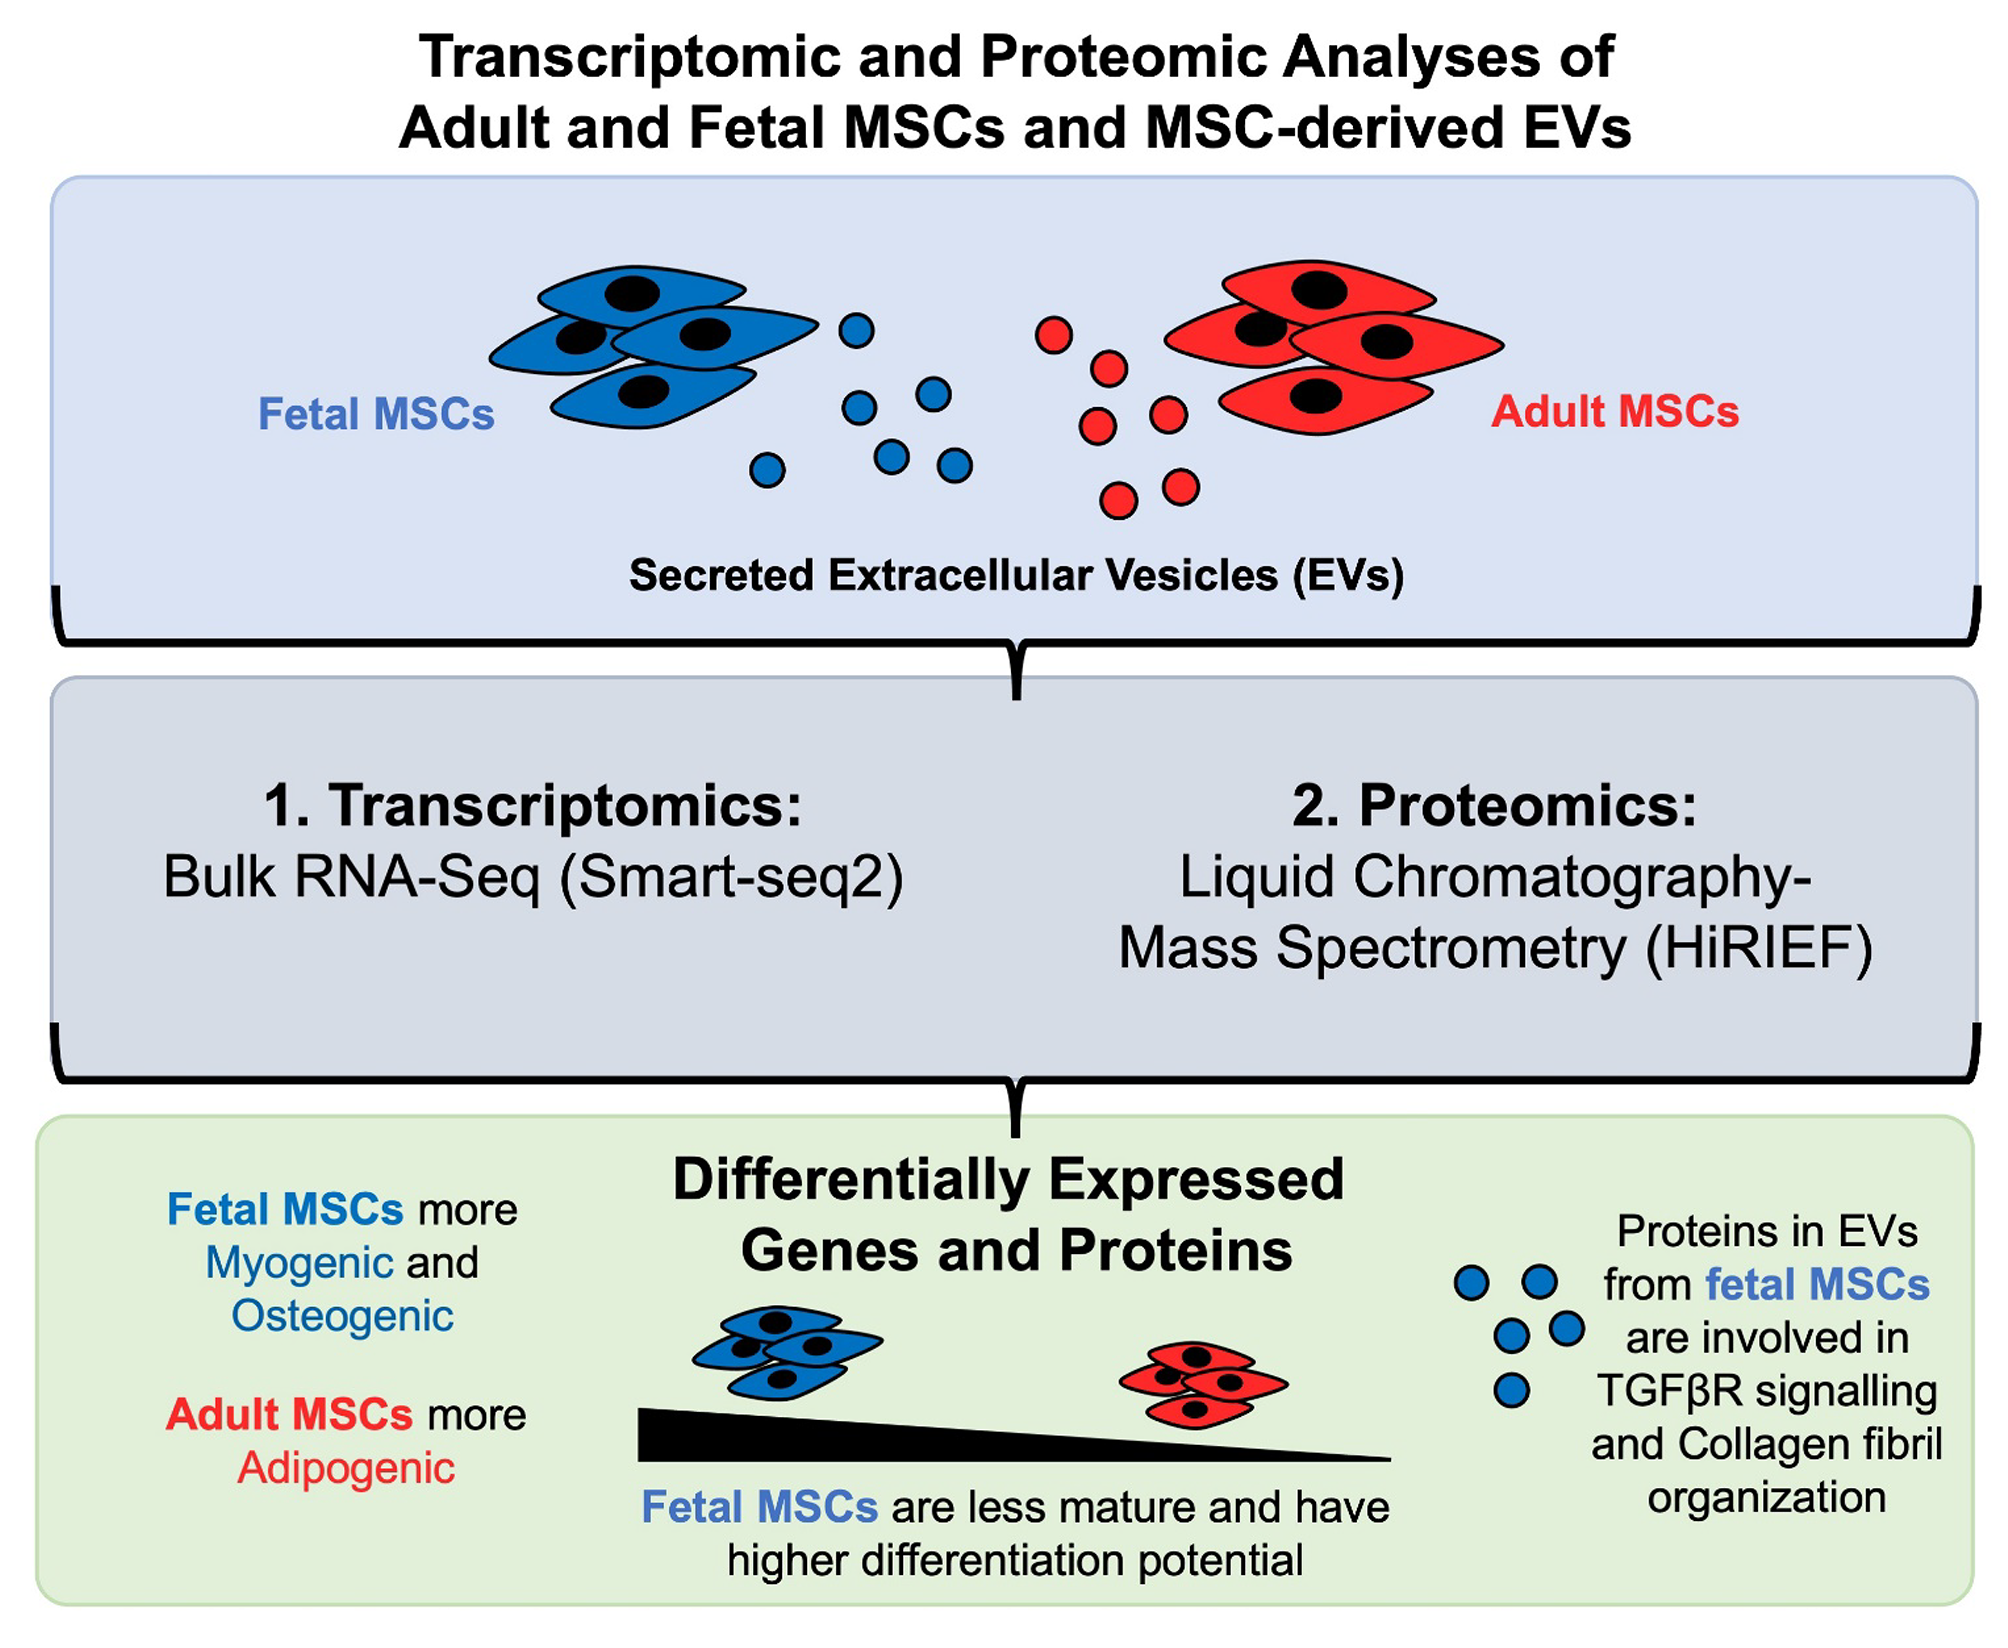 Transcriptomic and proteomic profiles of fetal versus adult mesenchymal stromal cells and mesenchymal stromal cell-derived extracellular vesicles